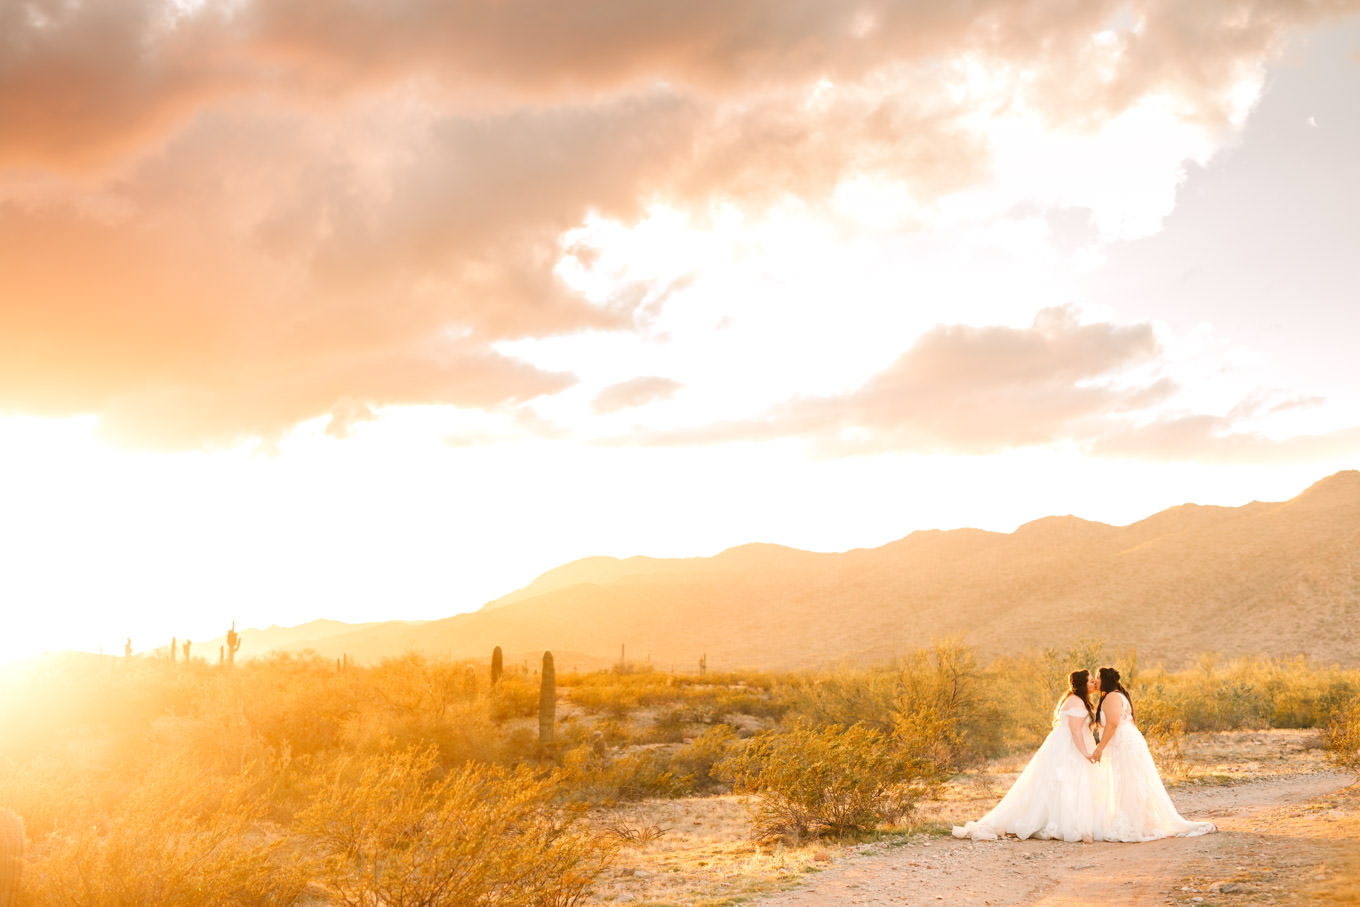 Two brides kissing at Arizona desert wedding | Engagement, elopement, and wedding photography roundup of Mary Costa’s favorite images from 2020 | Colorful and elevated photography for fun-loving couples in Southern California | #2020wedding #elopement #weddingphoto #weddingphotography   Source: Mary Costa Photography | Los Angeles